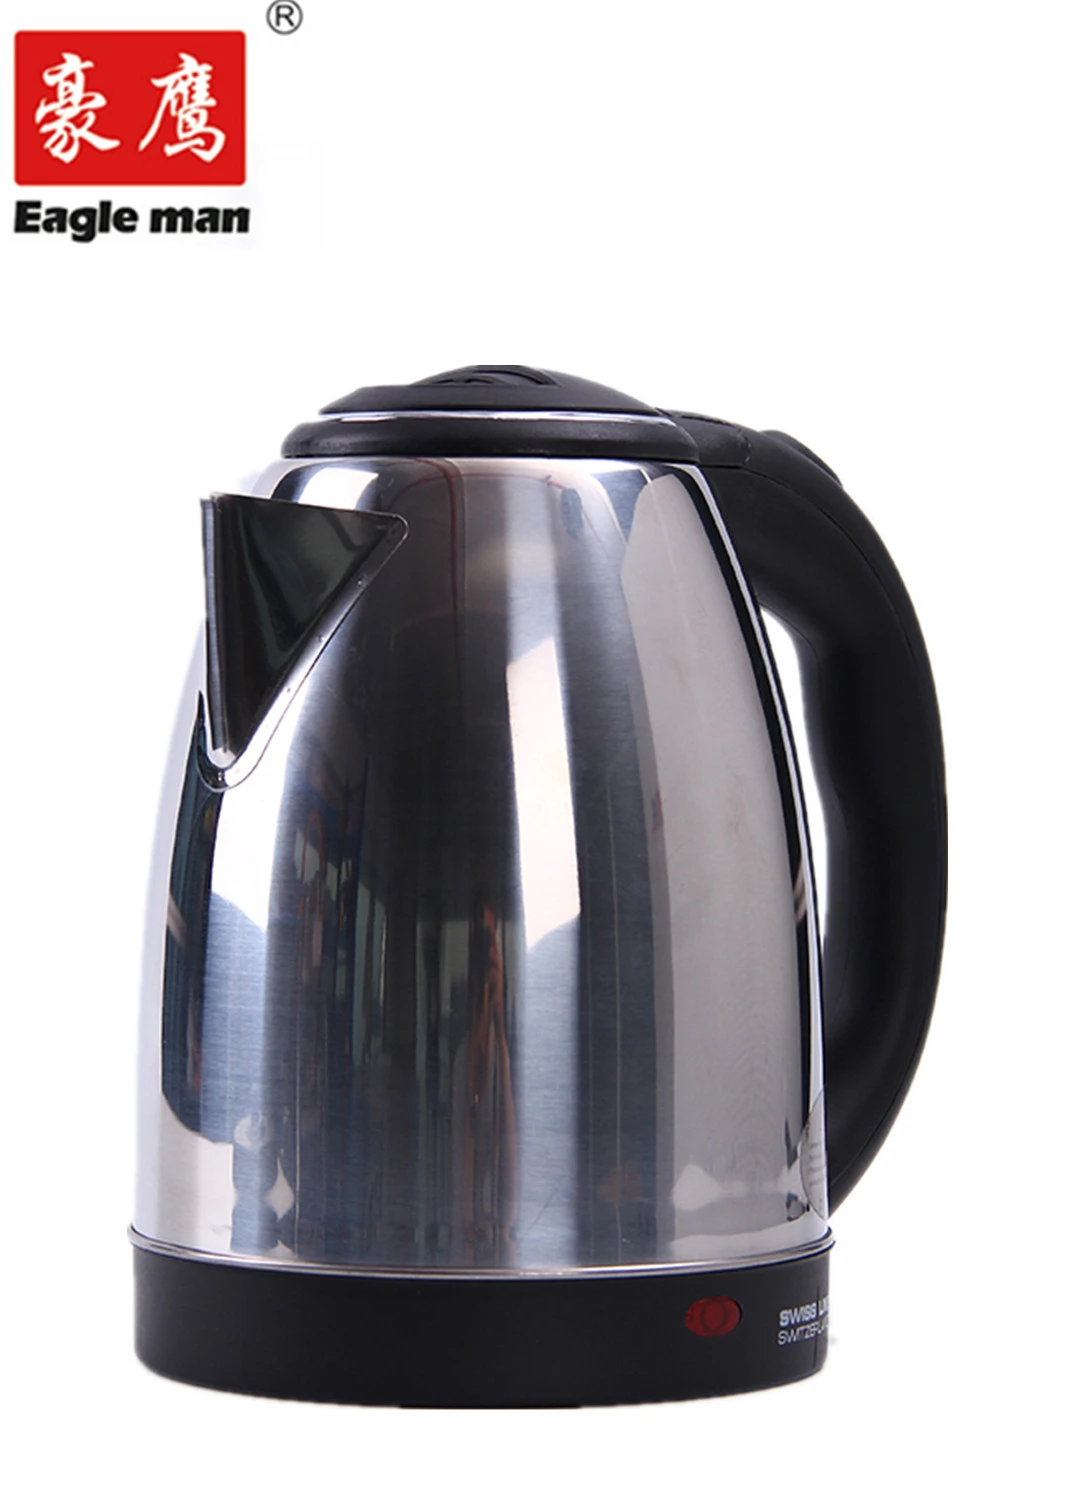 Home appliance stainless steel water electric kettle 1.5L 1.8L